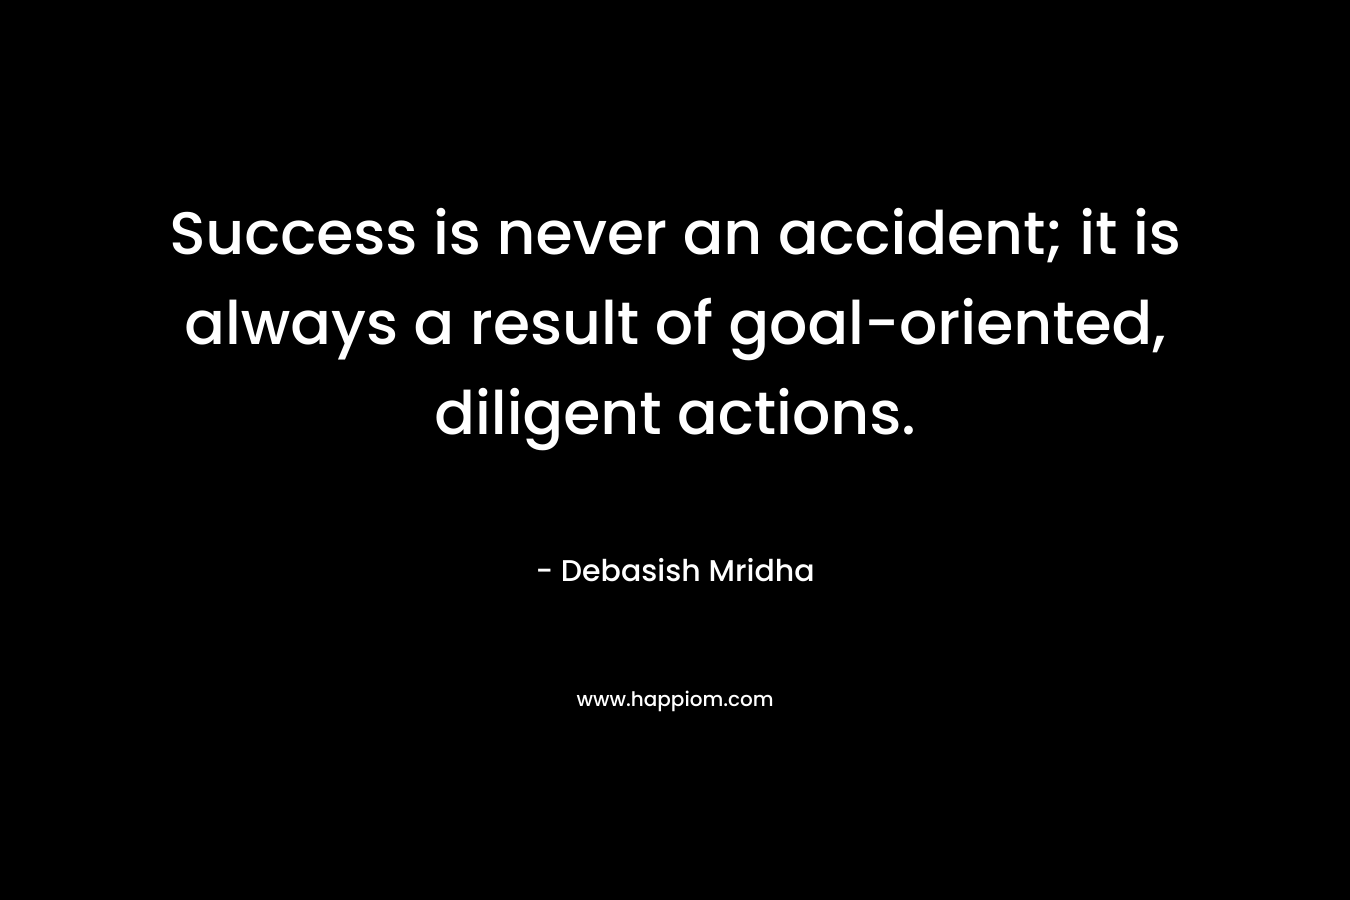 Success is never an accident; it is always a result of goal-oriented, diligent actions. – Debasish Mridha